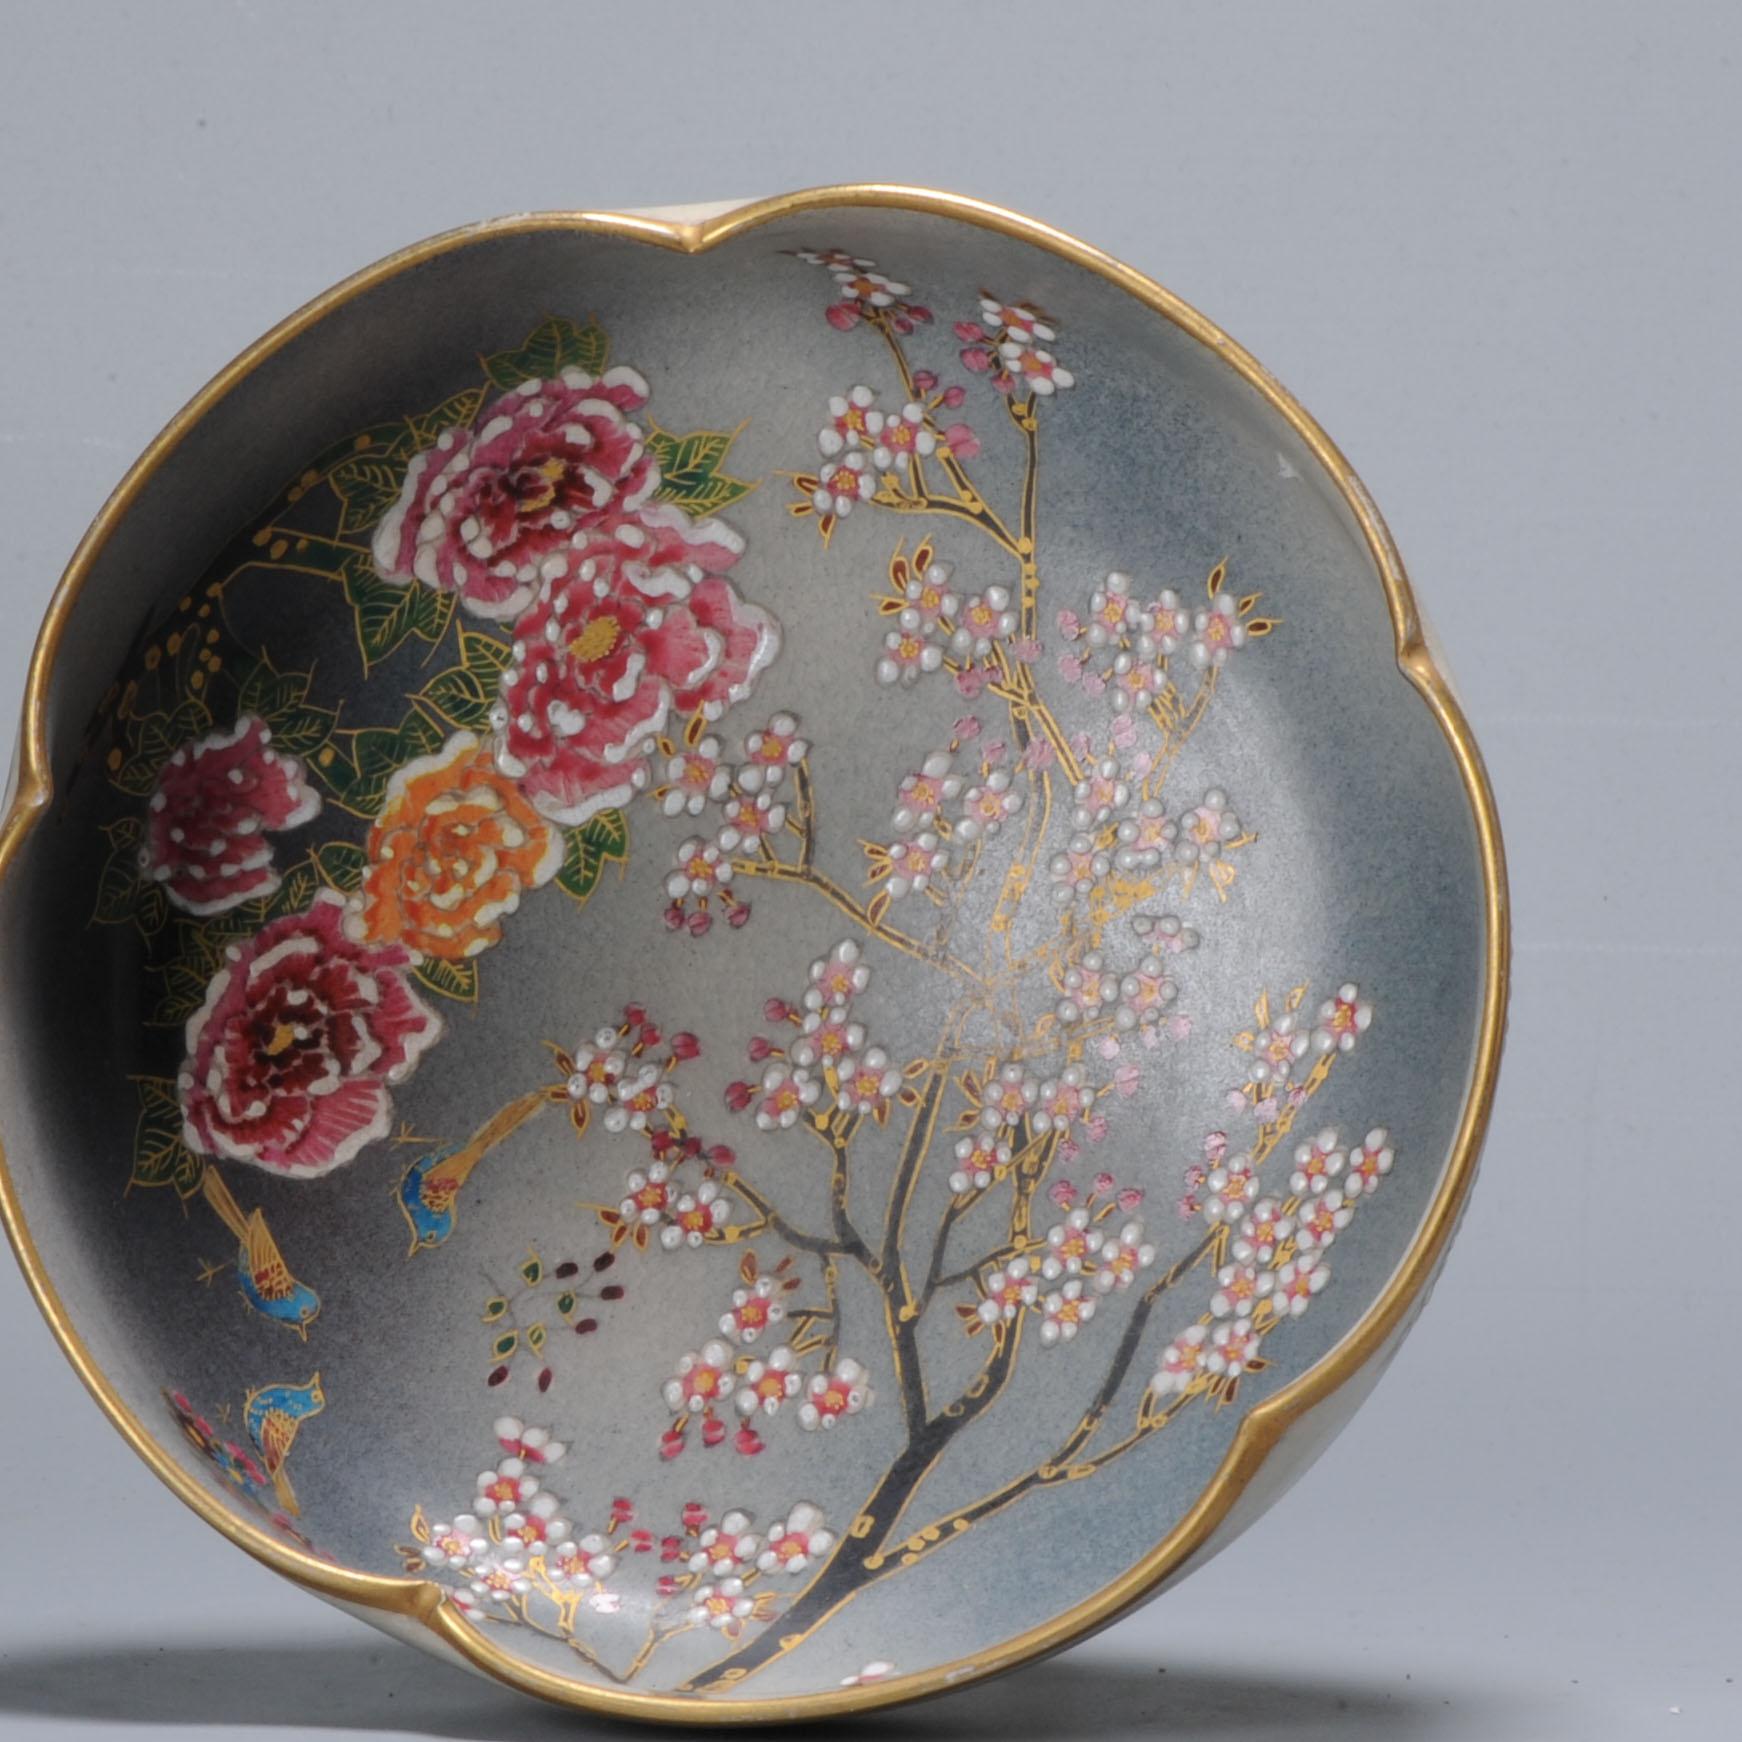 Antique Meiji Period Japanese Satsuma Bowl Flowers, 19 Century In Excellent Condition For Sale In Amsterdam, Noord Holland